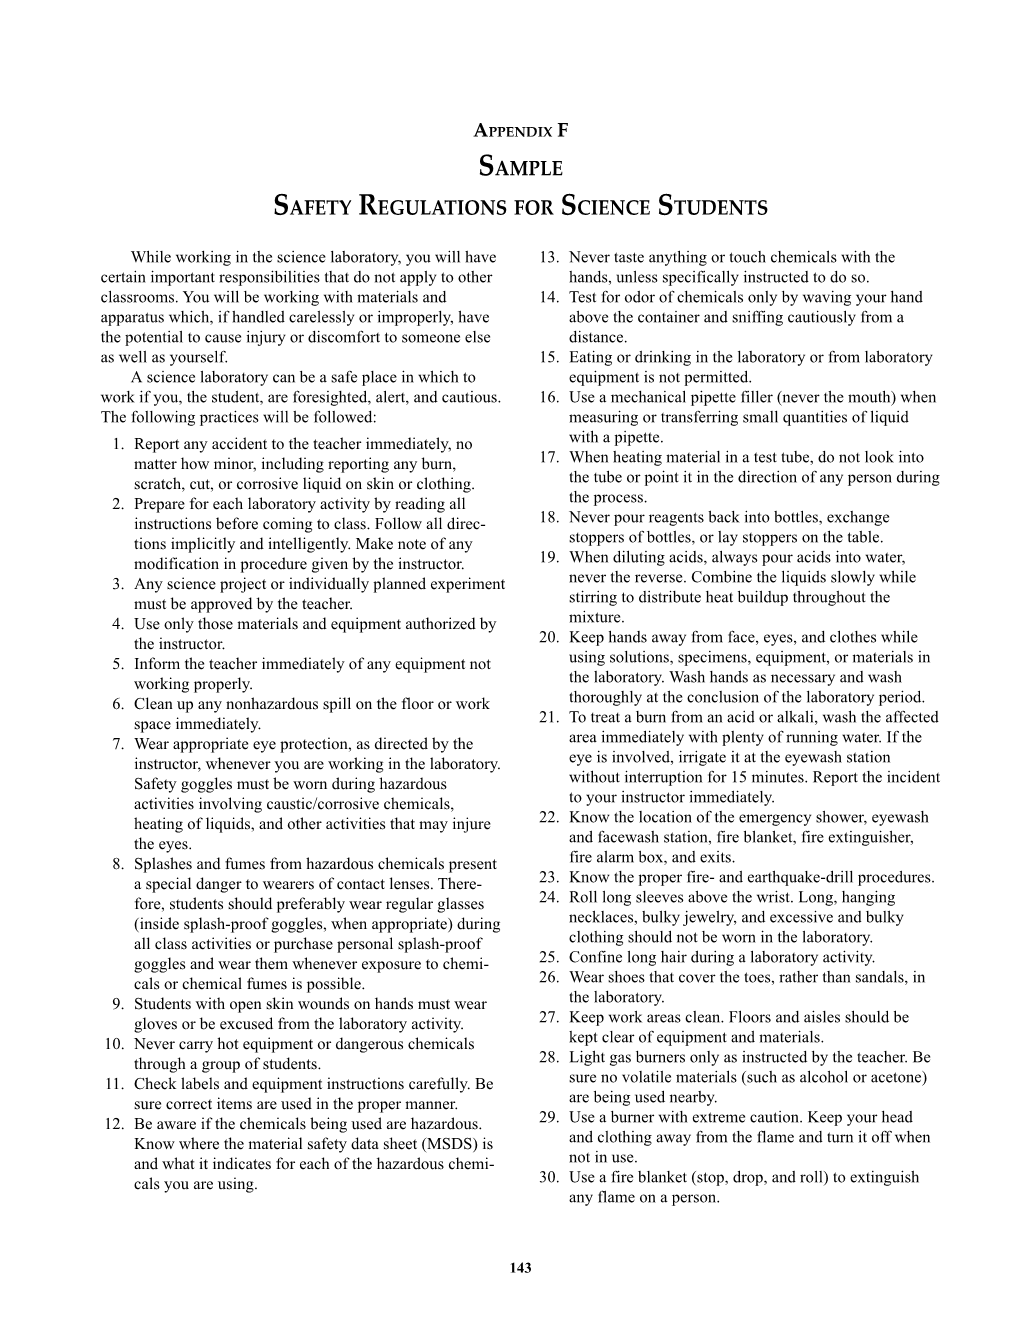 Sample Safety Regulations for Science Students